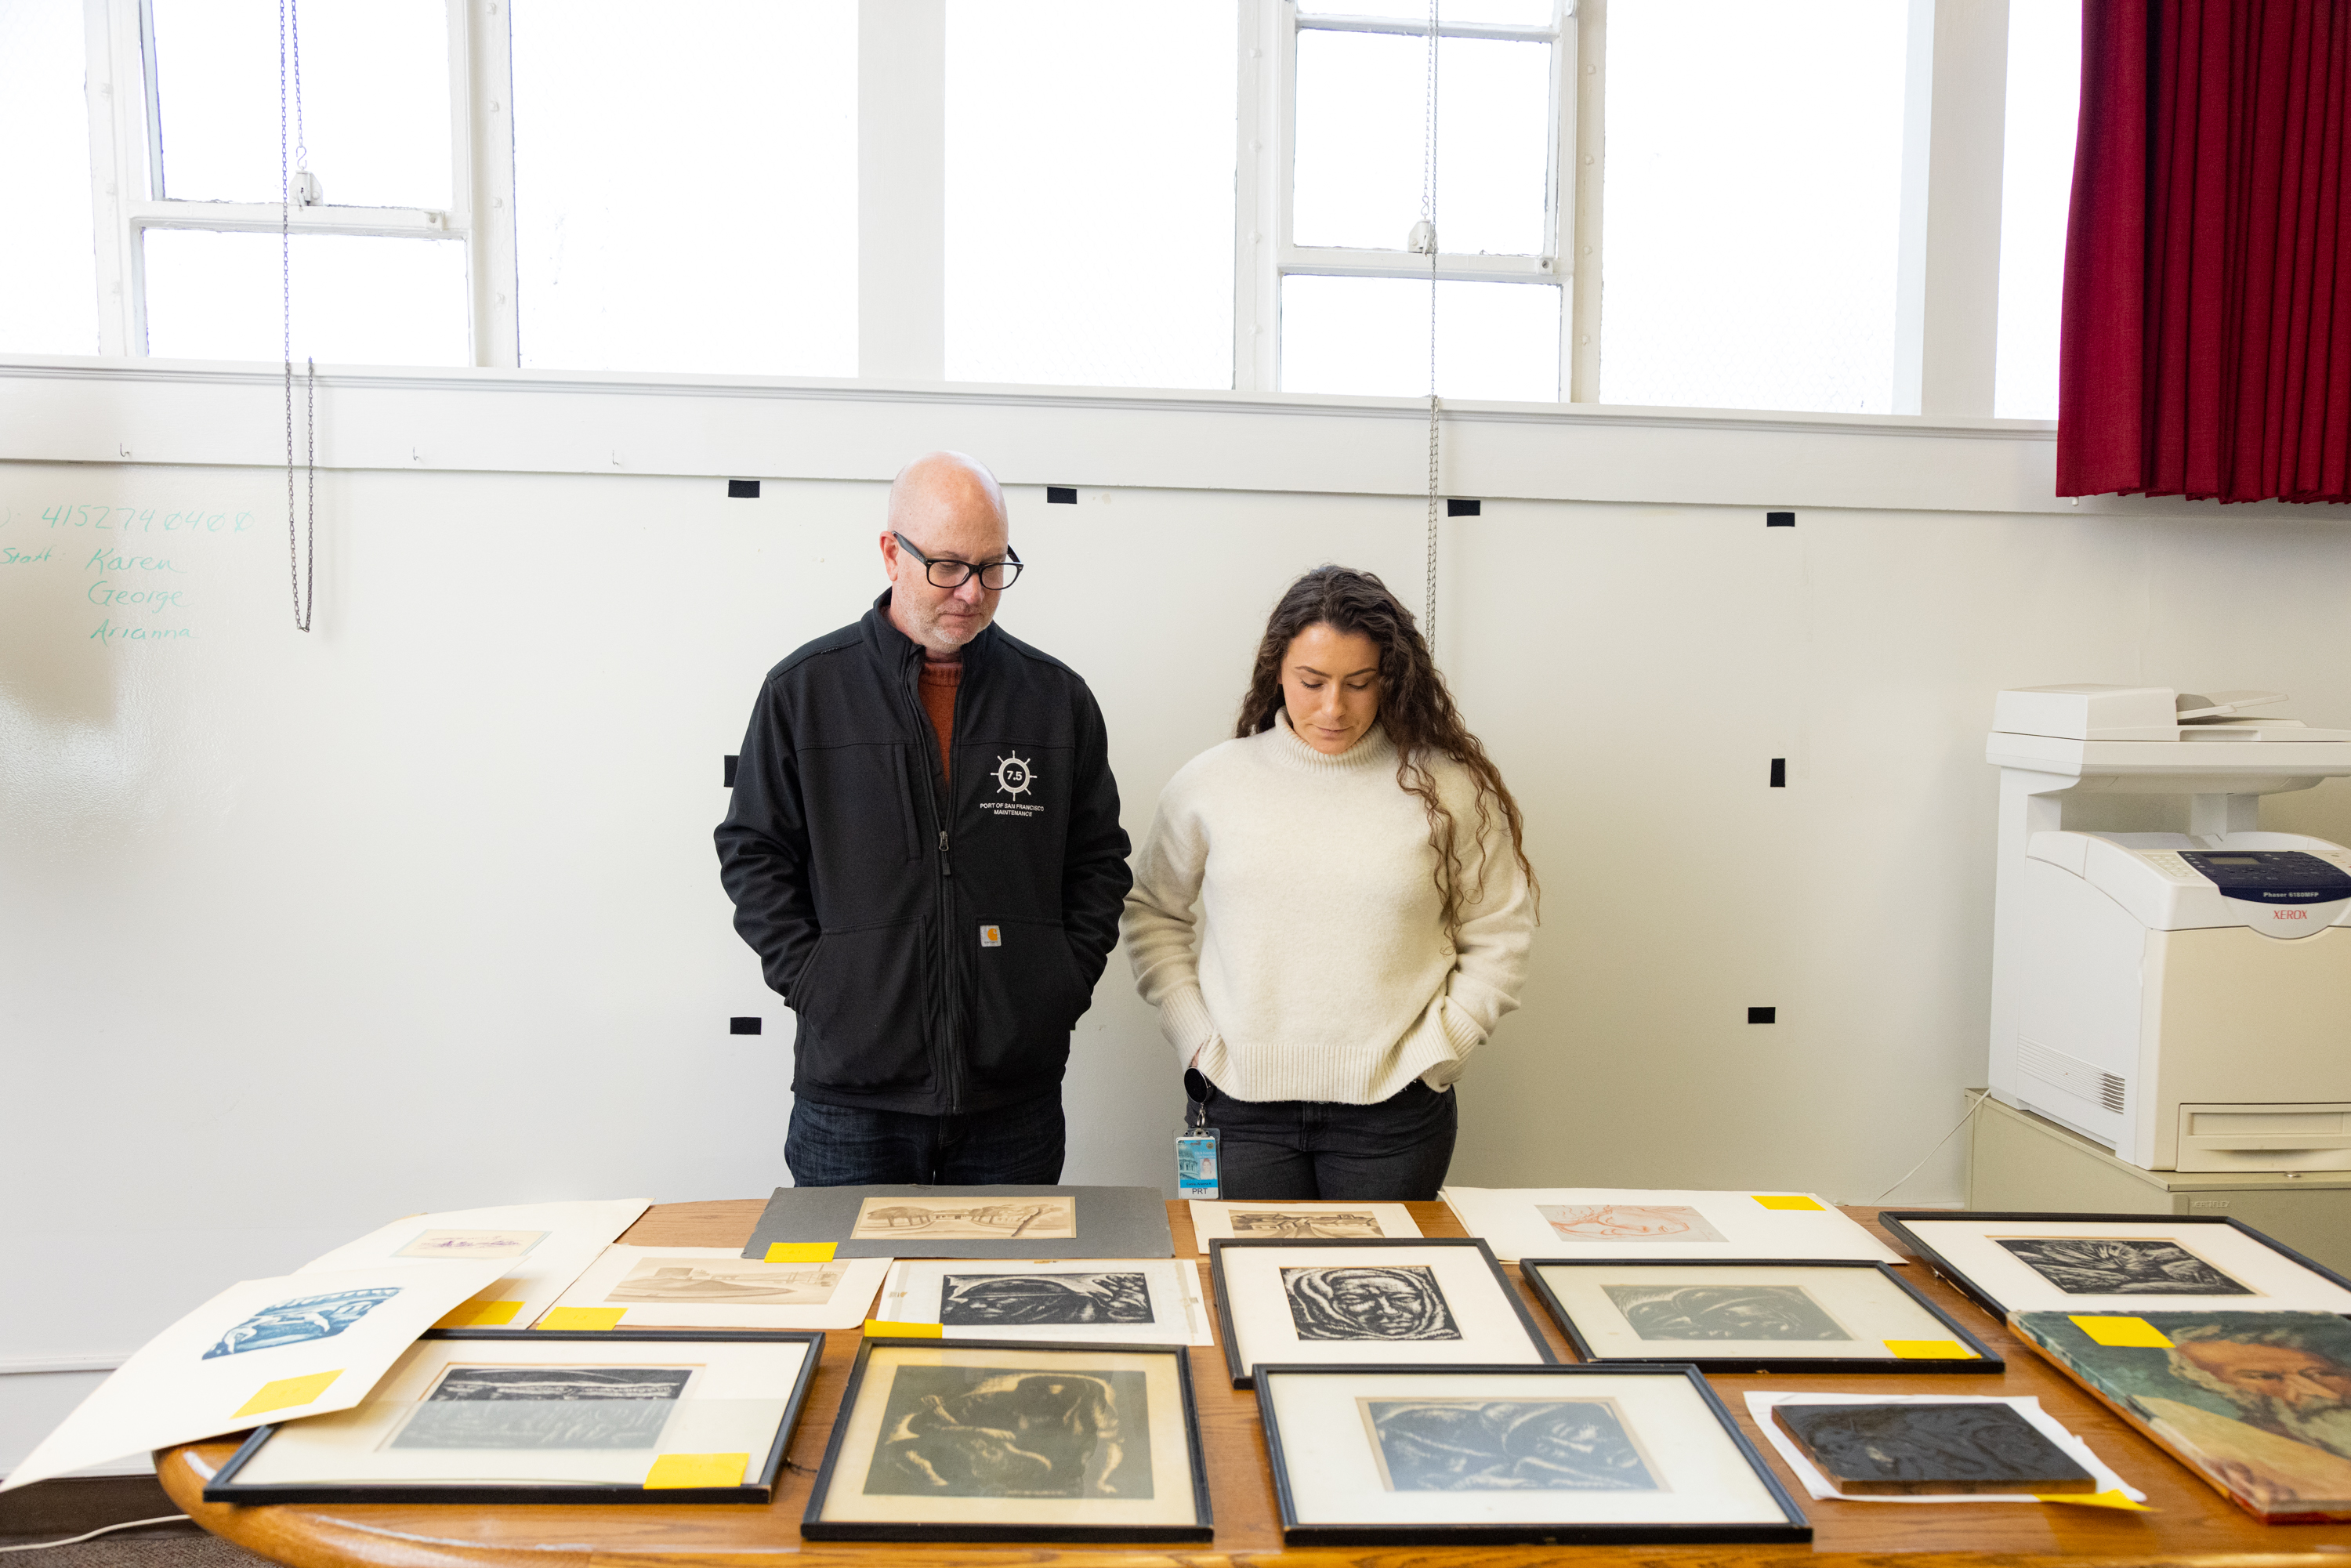 Two people are observing various framed artworks displayed on a table in a bright room.